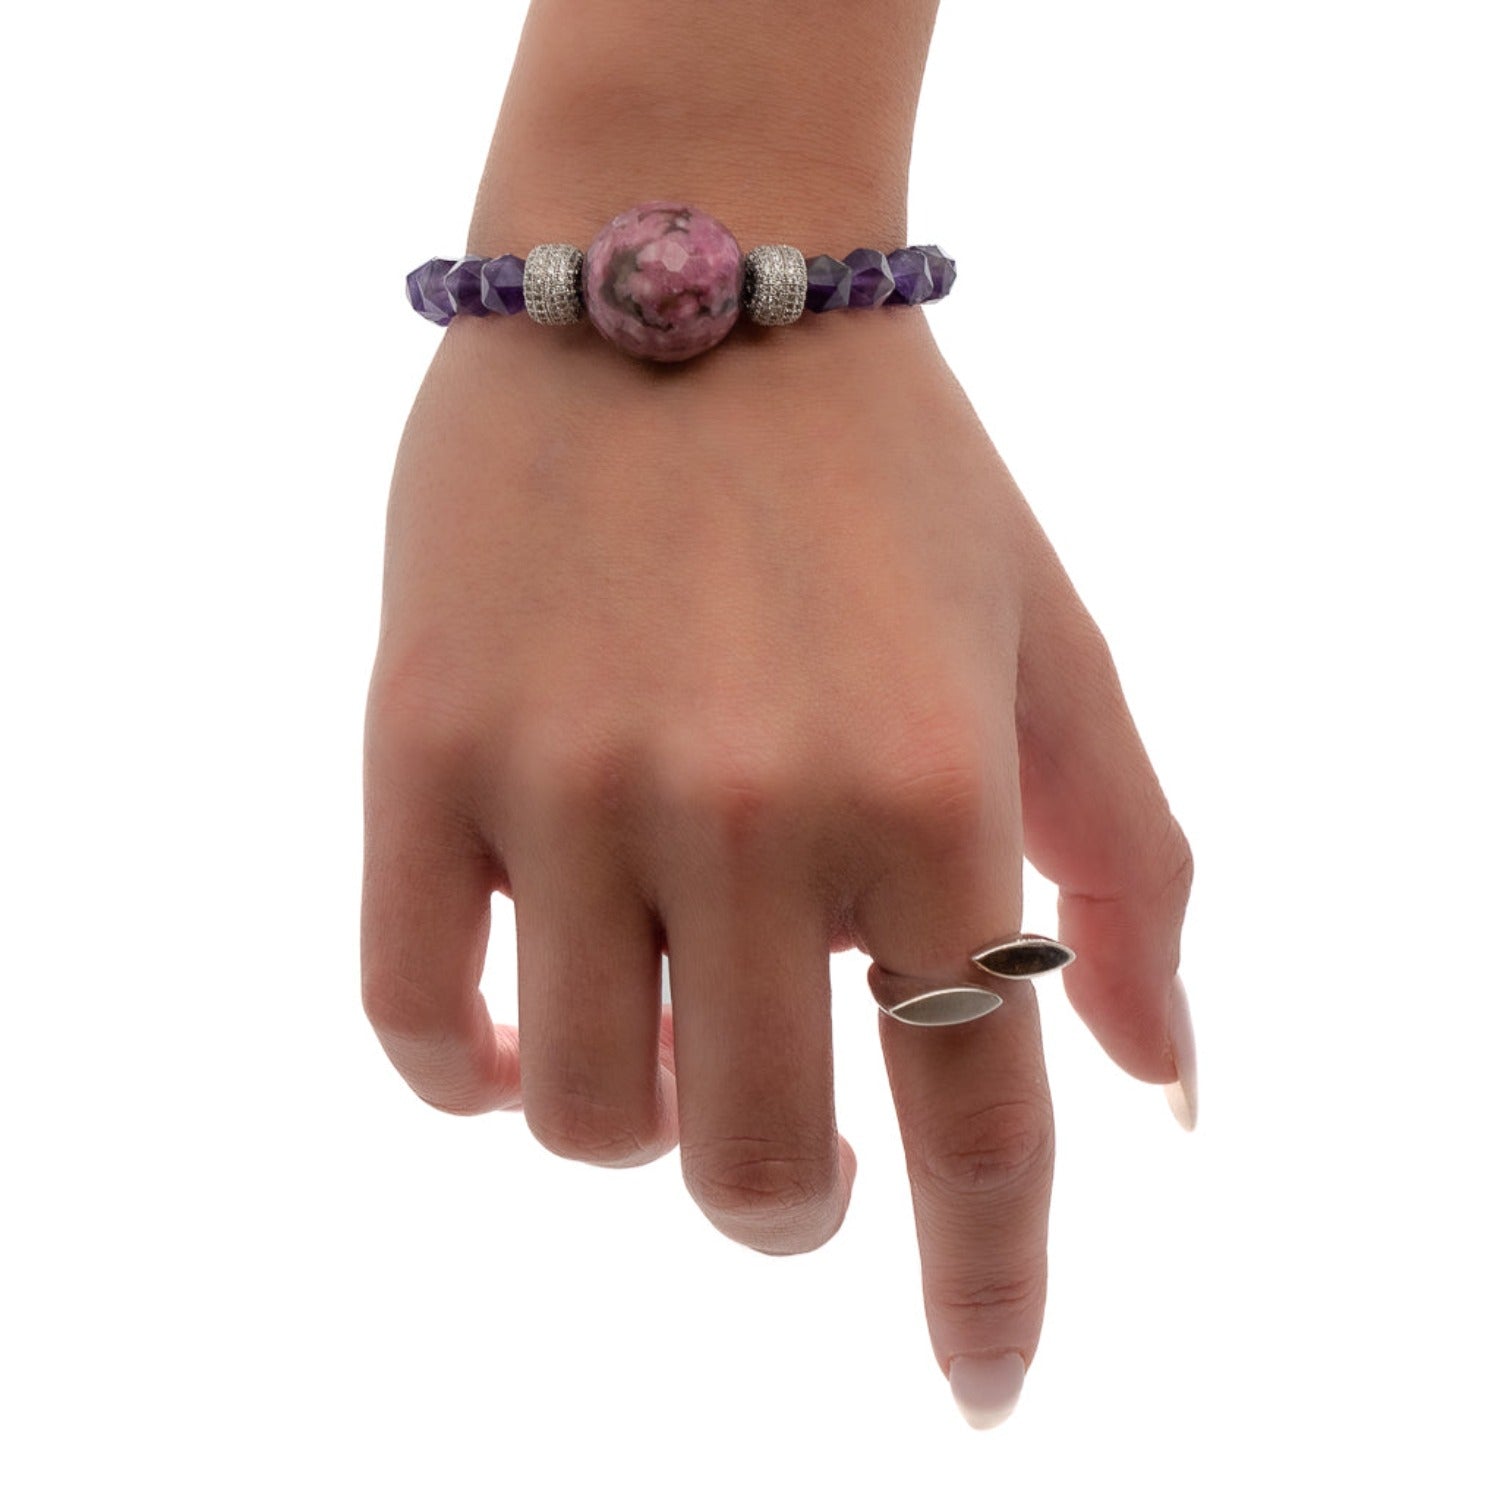 Experience the elegance of the Stylish Women Bracelet through the model&#39;s graceful presence, highlighting its natural amethyst stones and glamorous design.